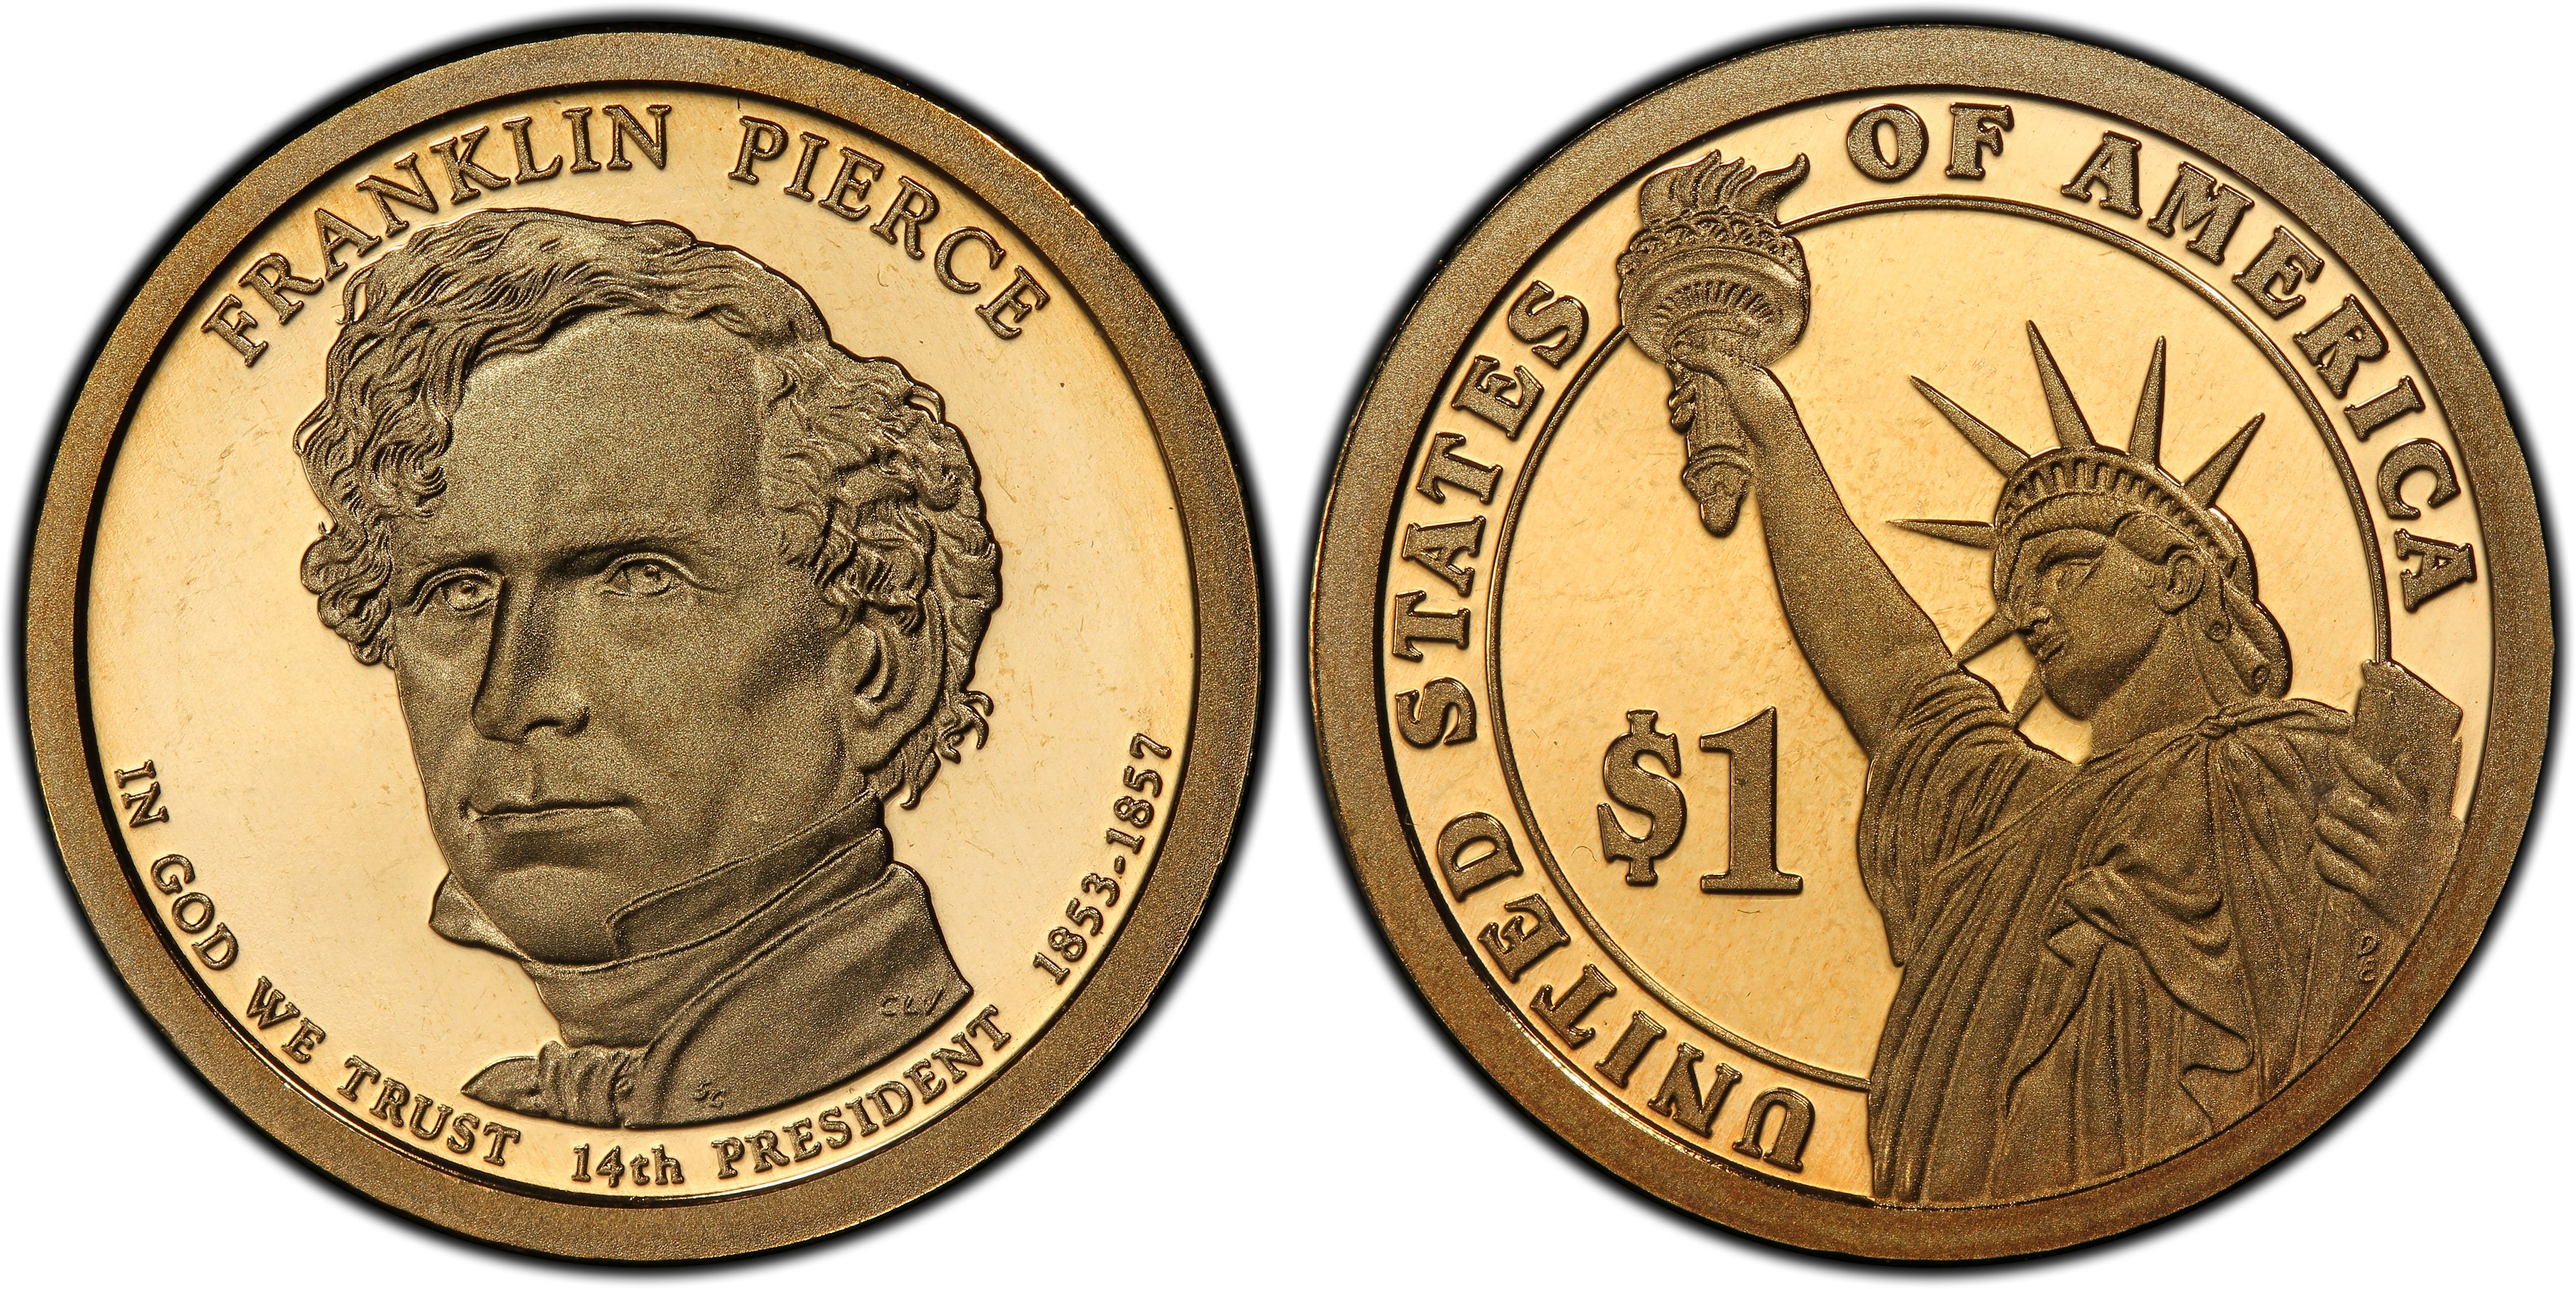 Details about   NGC 14th President Franklin Pierce 2010 S $1 PF 69 Ultra Cameo 